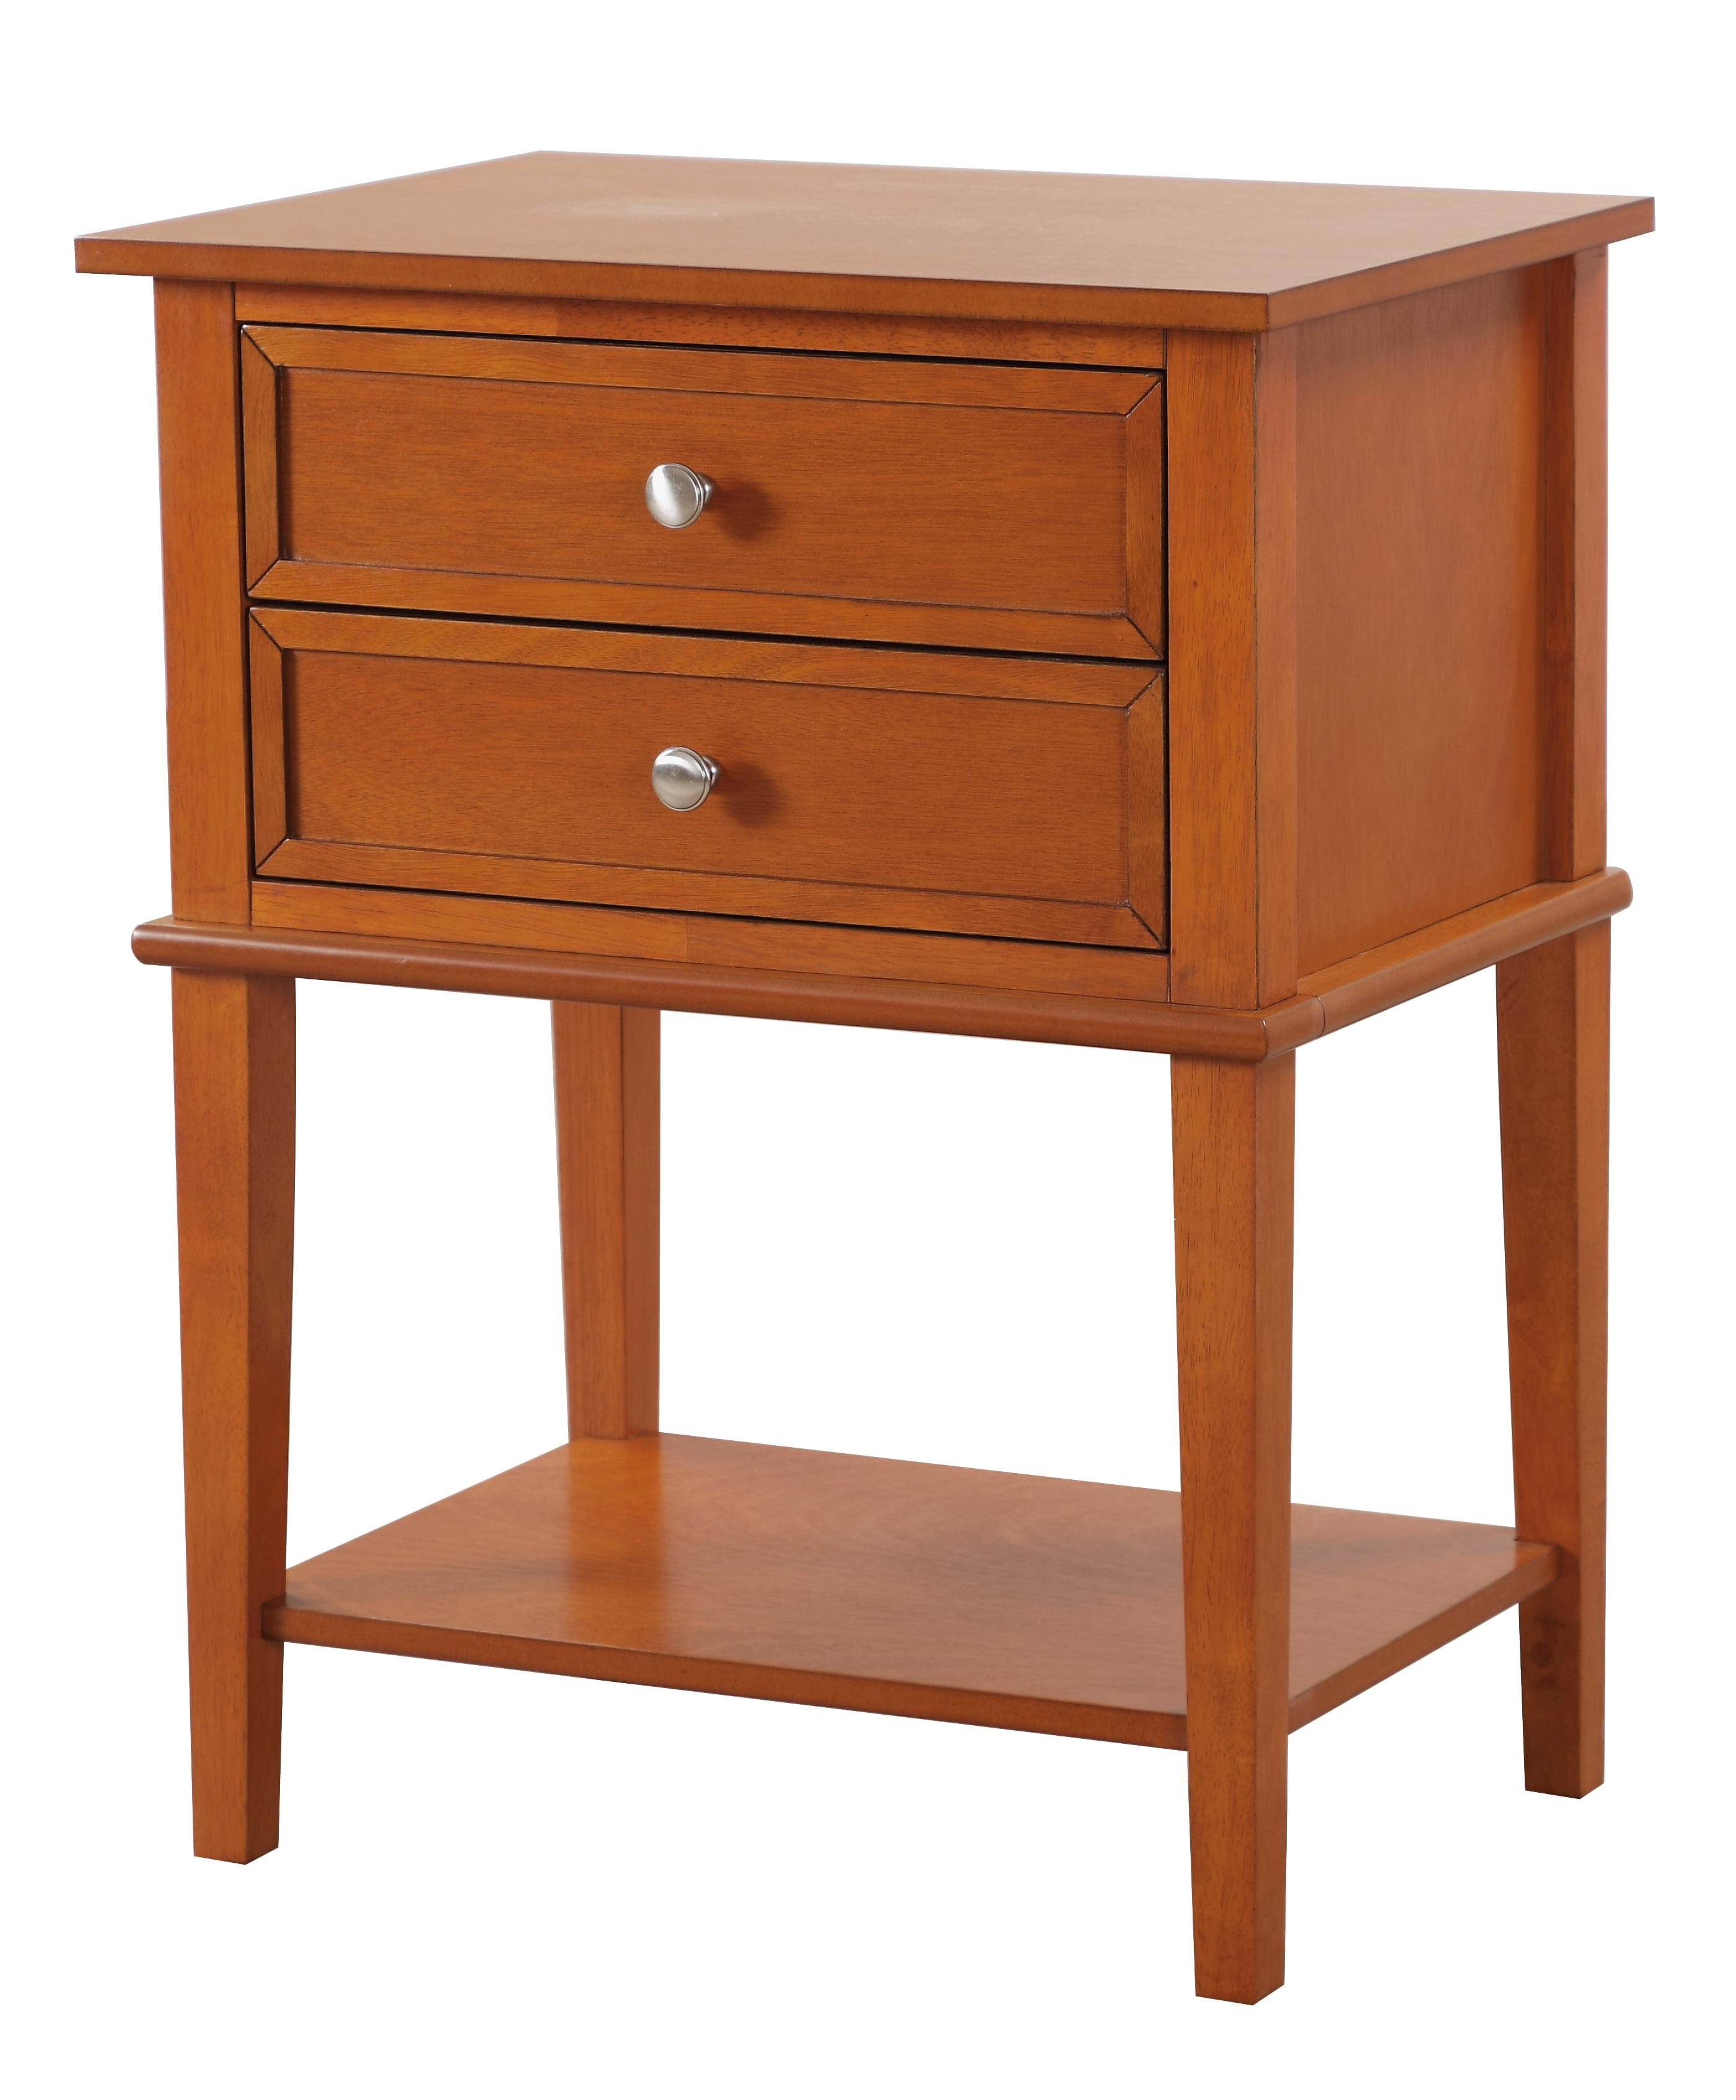 Contemporary Oak Wood 2-Drawer Nightstand with Nickel Hardware